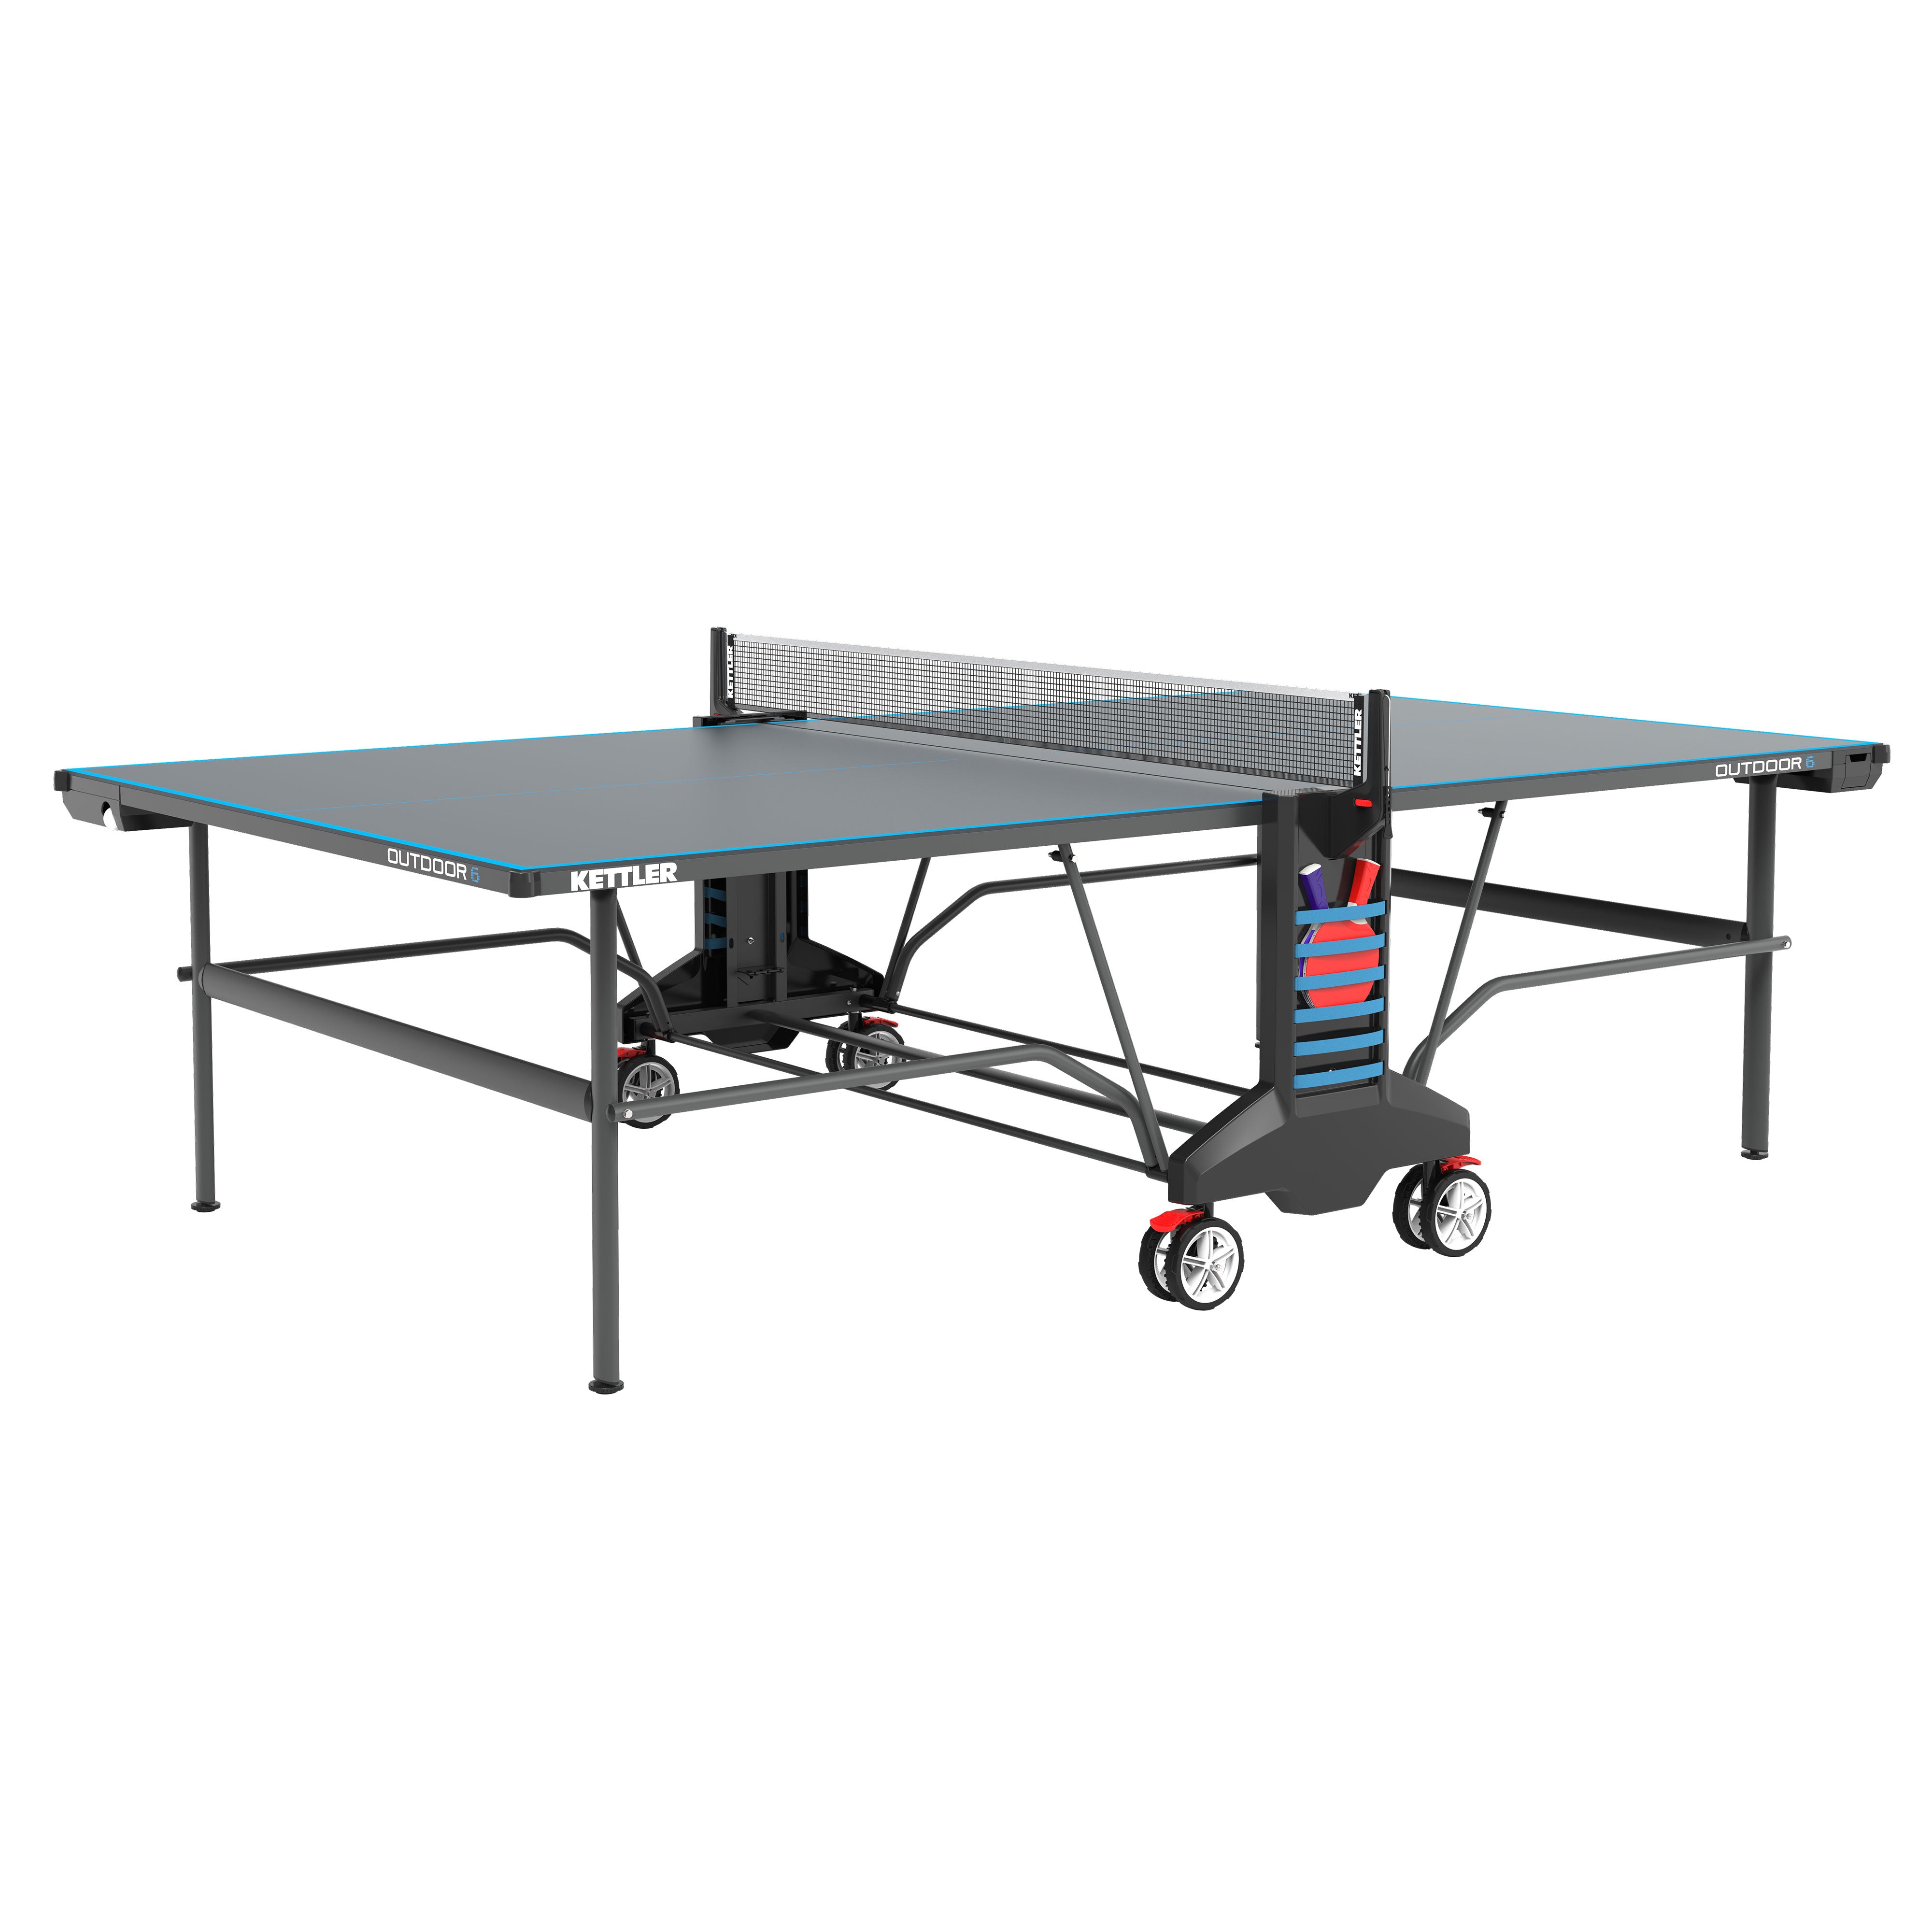 Outdoor 6 Table Tennis Table